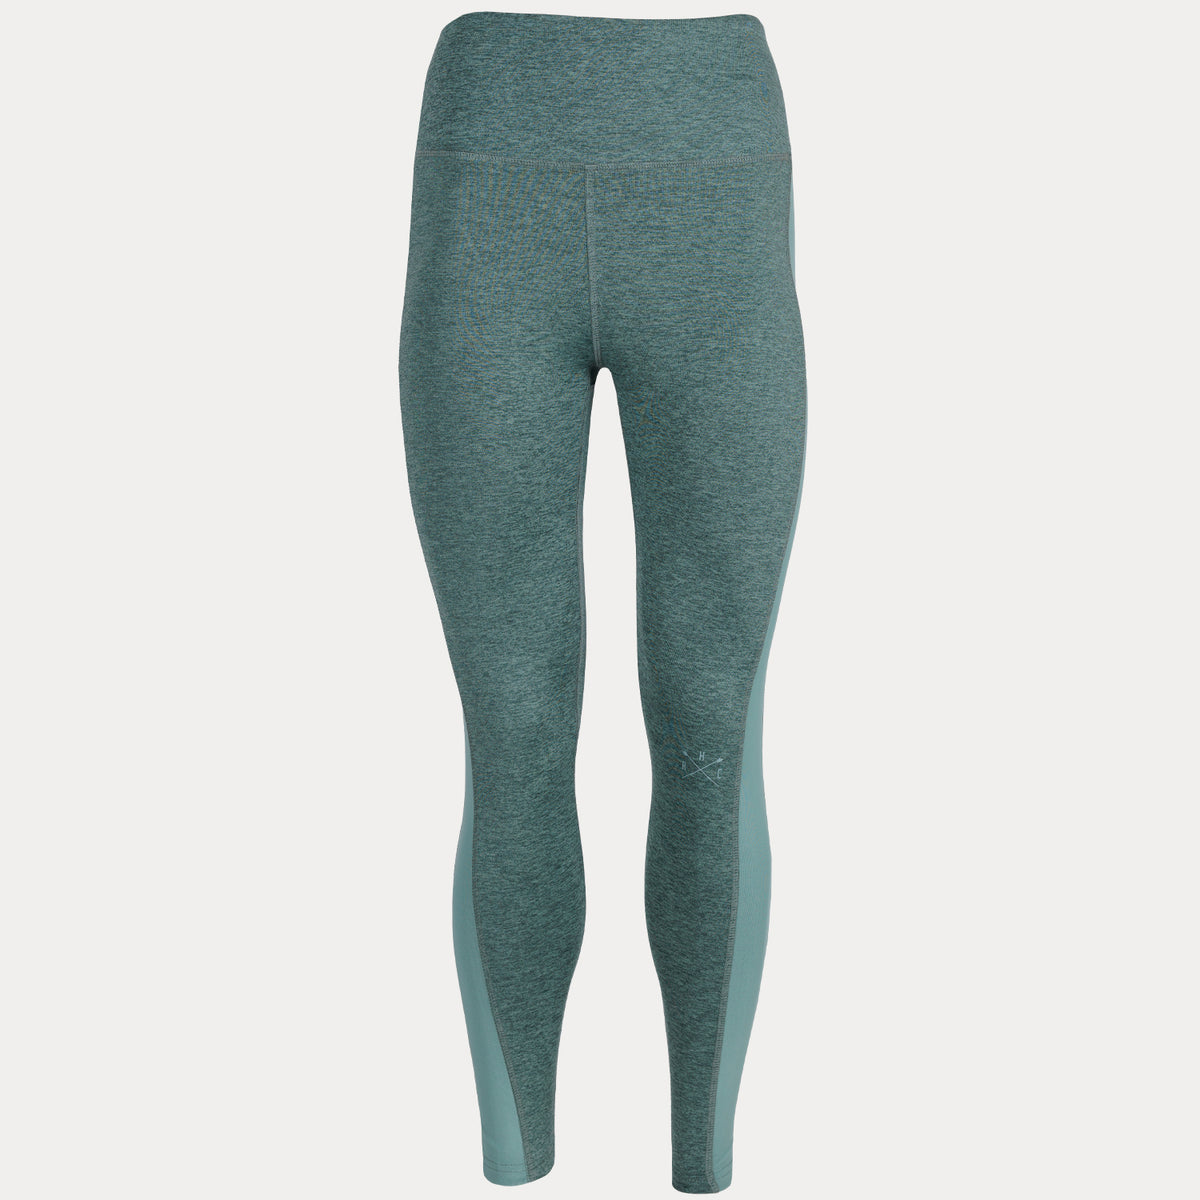 photo of forest green heathered leggings from front crossed HRC oars logo on left knee